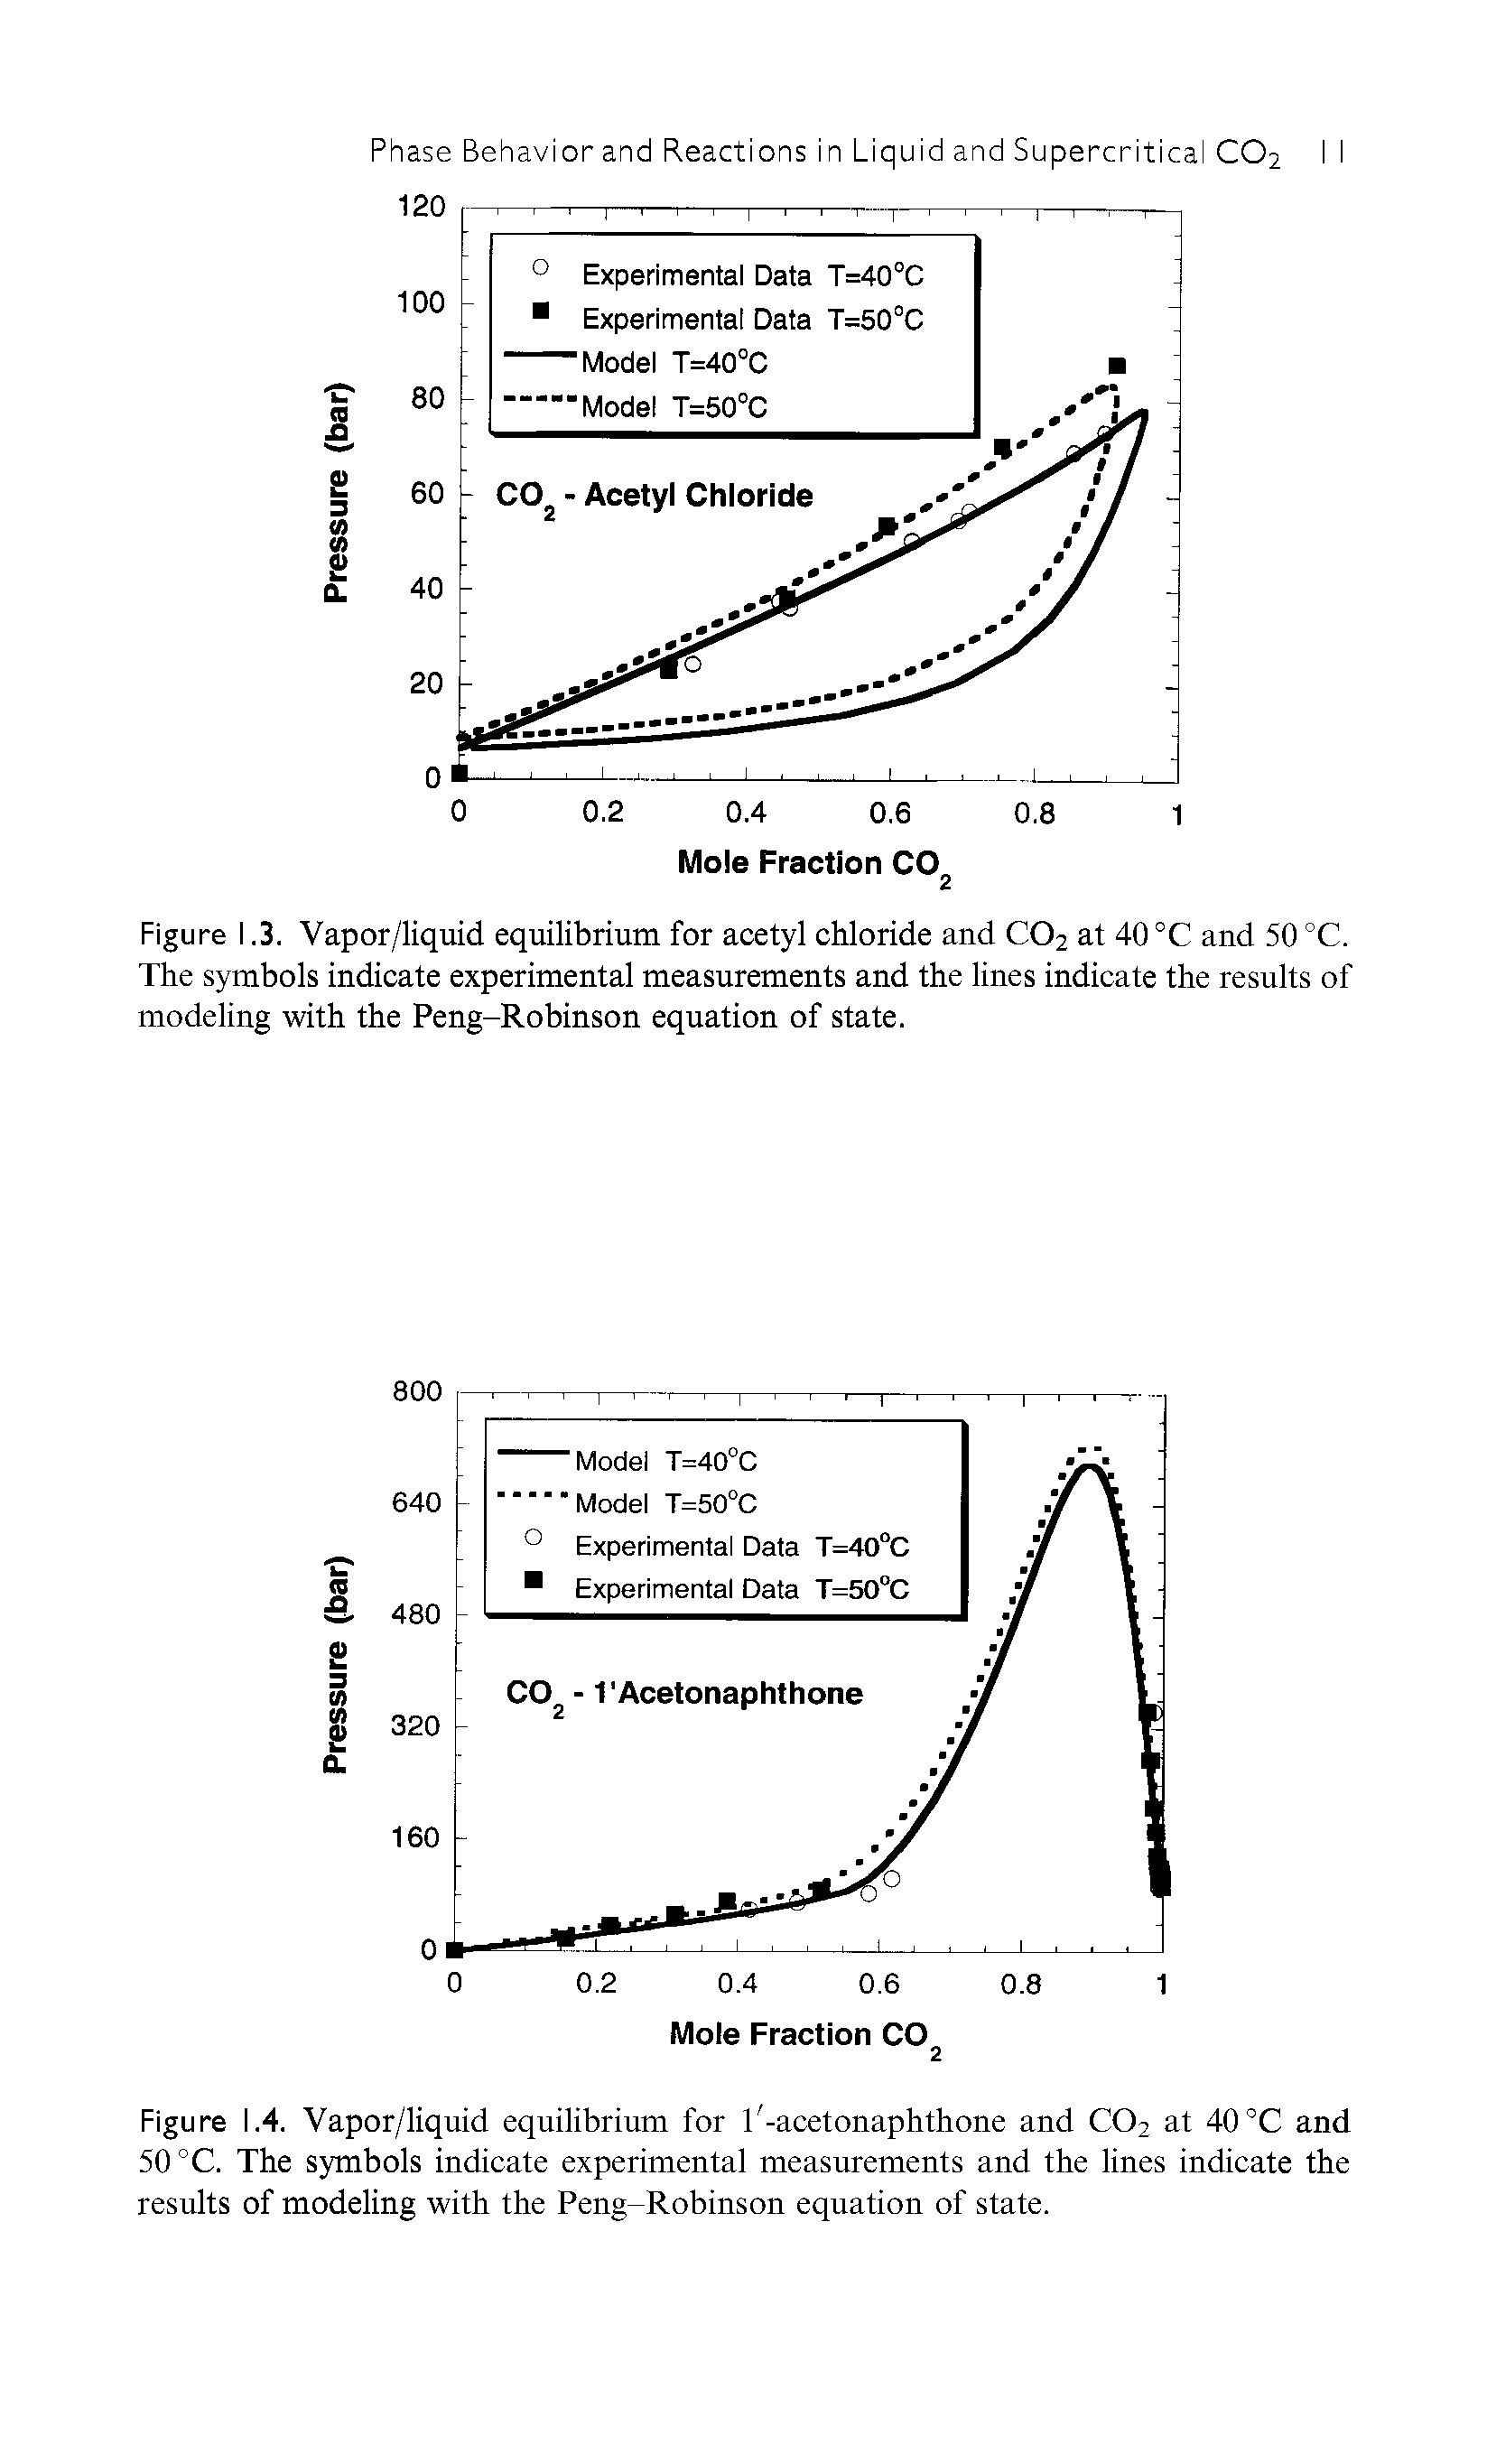 Figure 1.4. Vapor/liquid equilibrium for l -acetonaphthone and C02 at 40°C and 50 °C. The symbols indicate experimental measurements and the lines indicate the results of modeling with the Peng-Robinson equation of state.